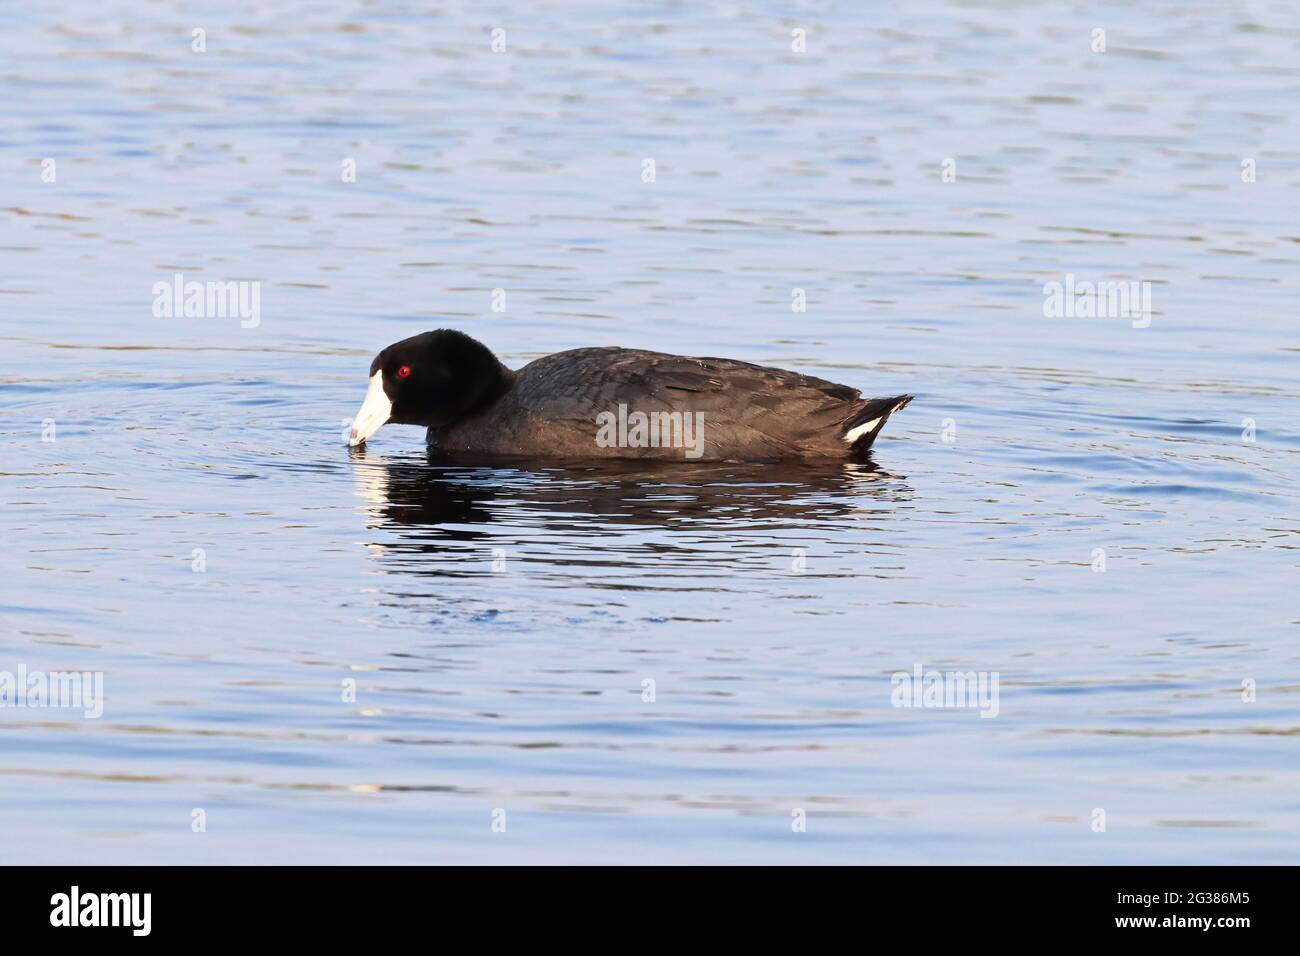 An American Coot duck swimming in water Stock Photo